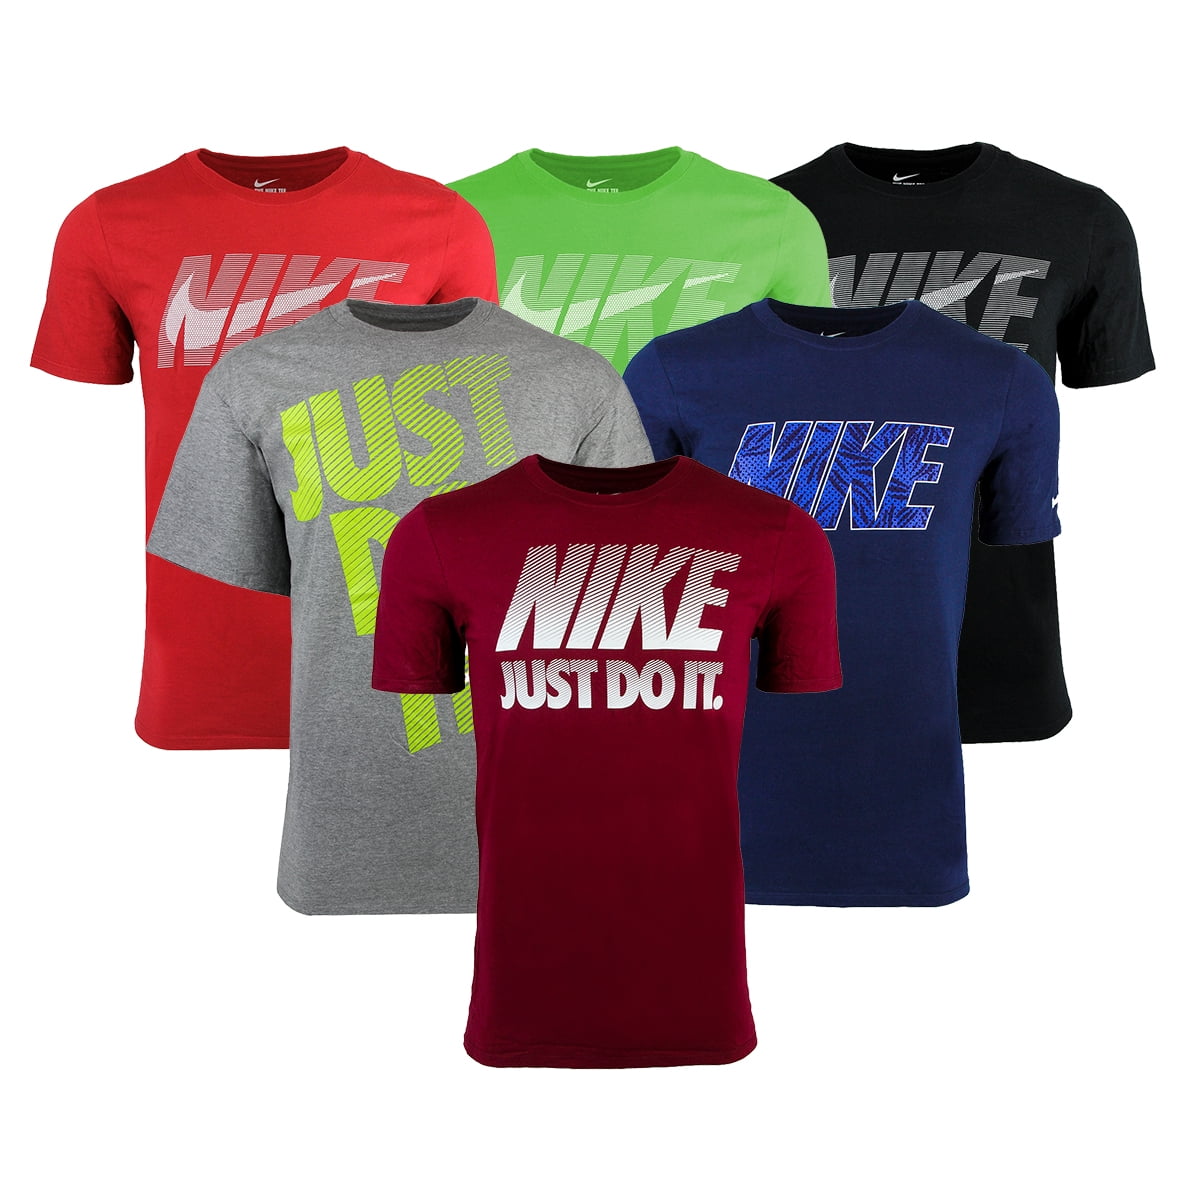 Nike - Men's Mystery T-Shirts 2-Pack 